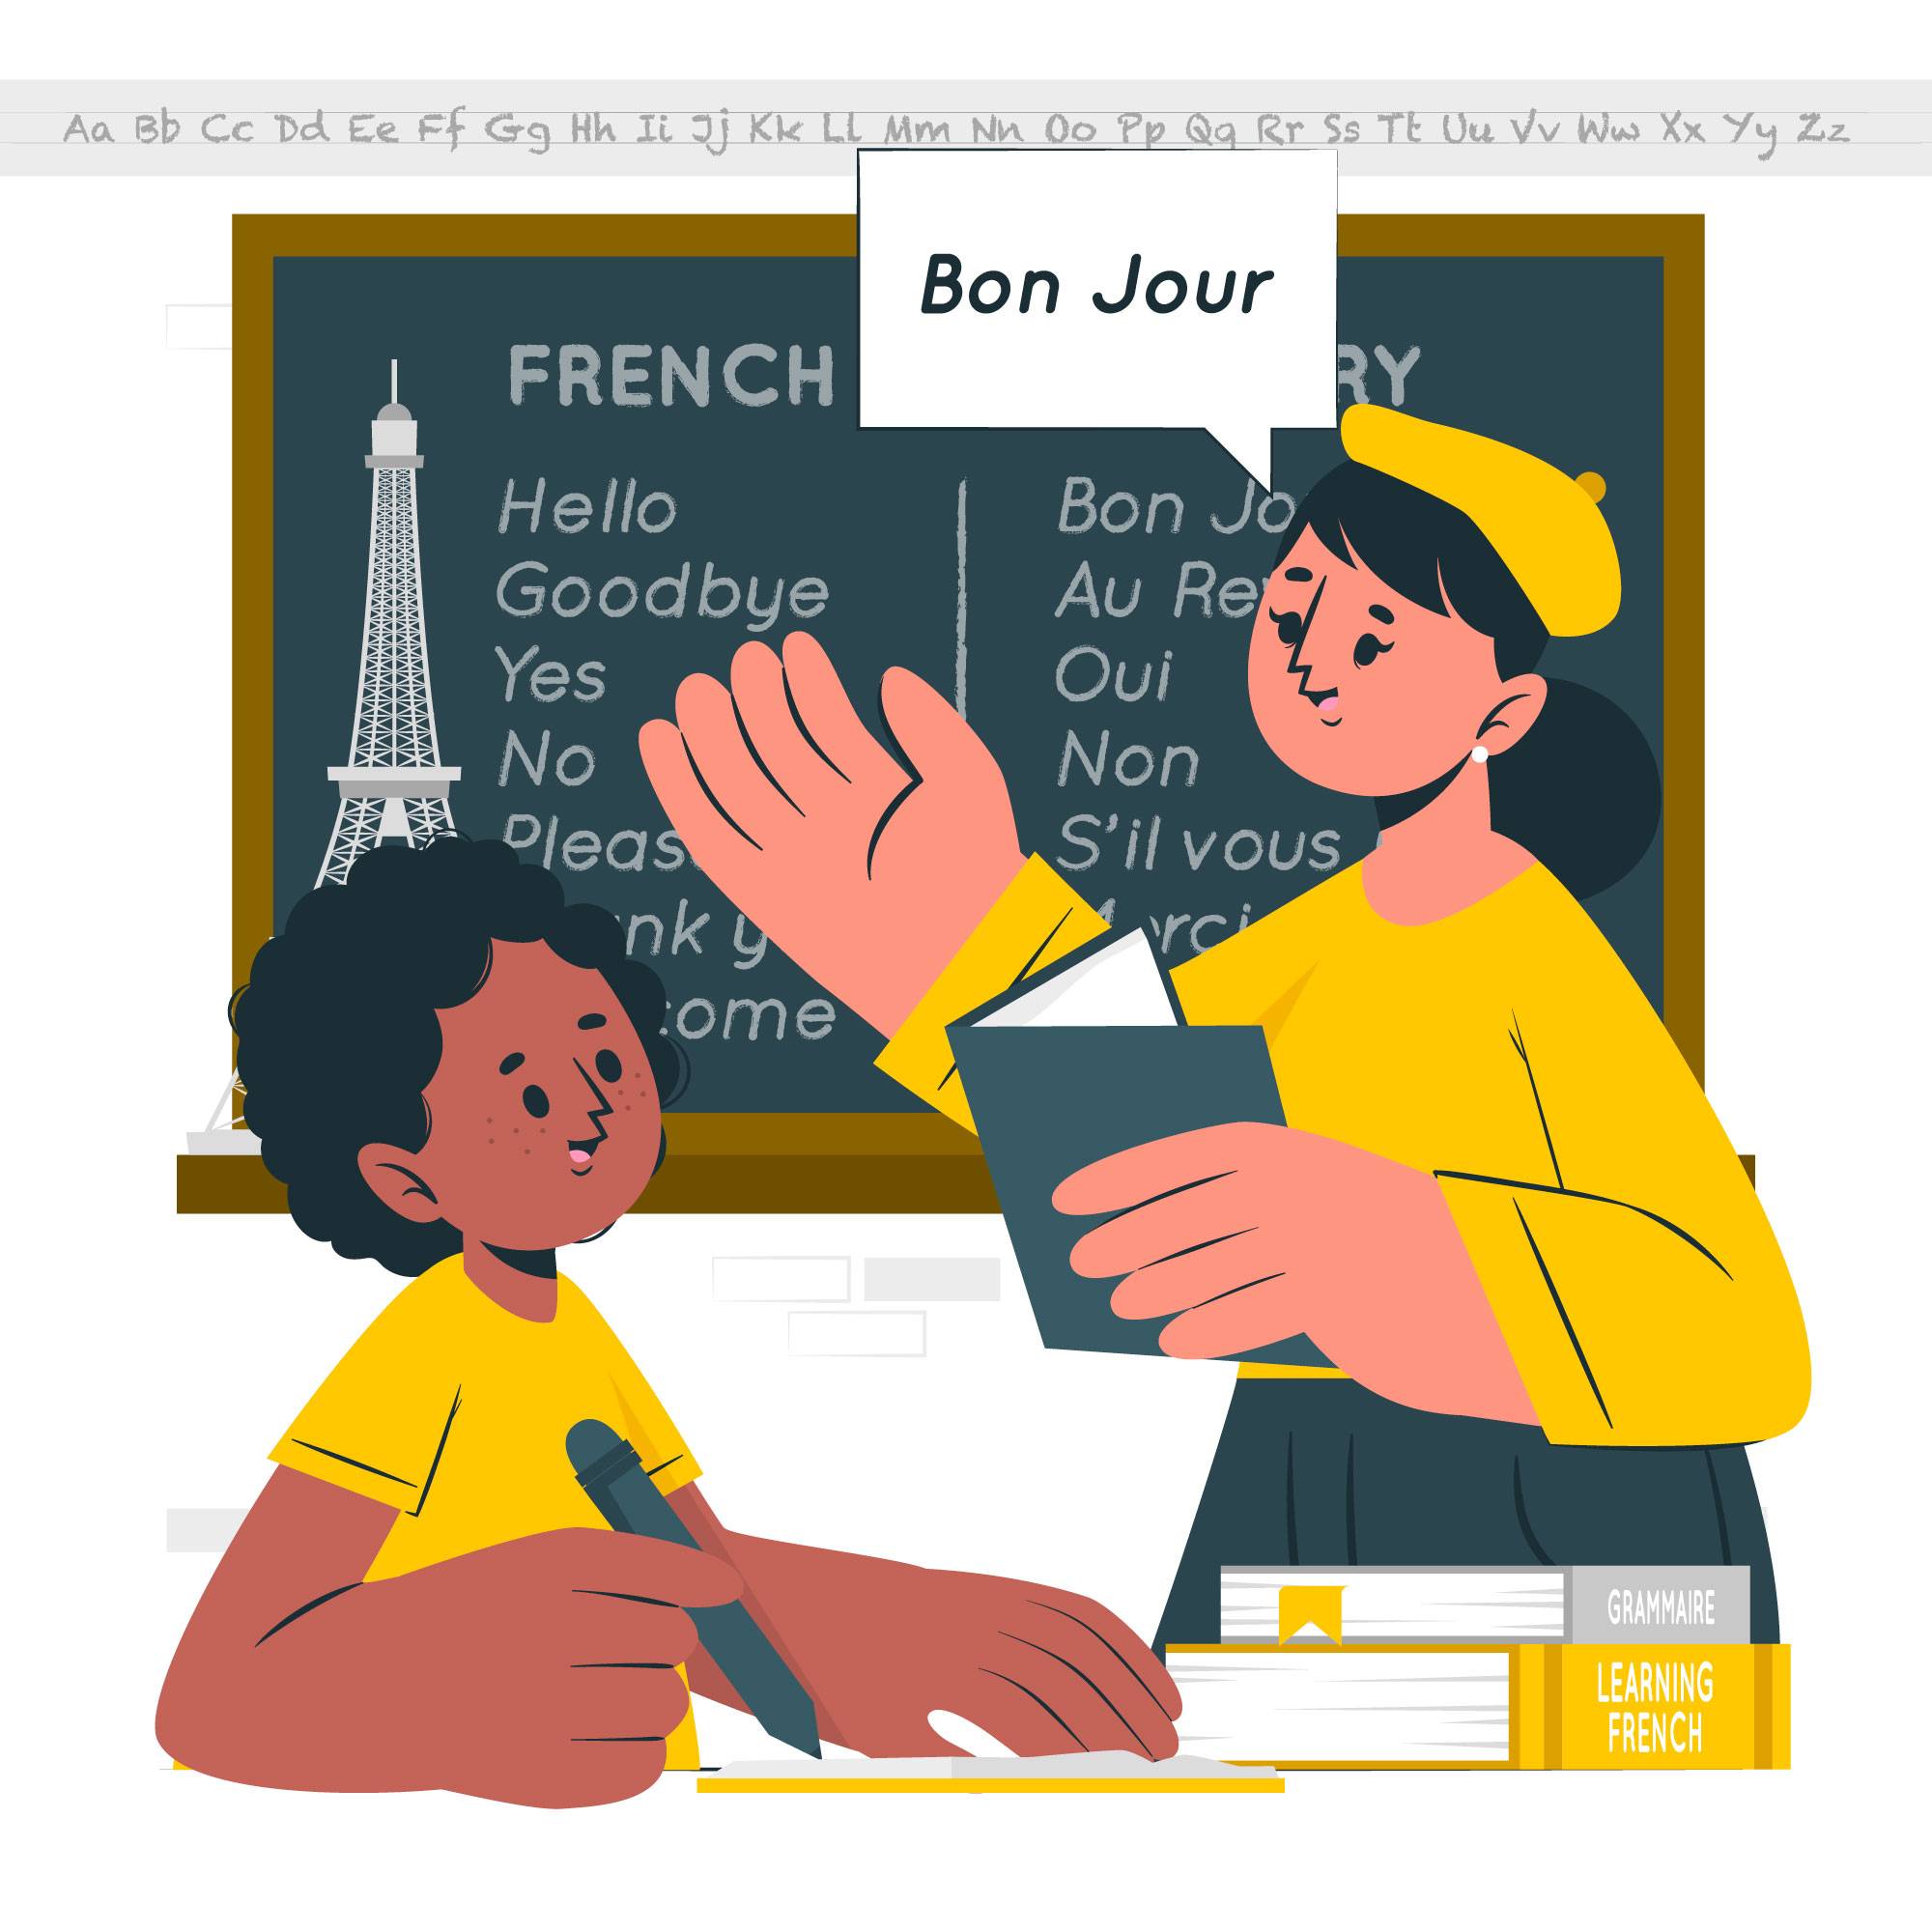 Learn french